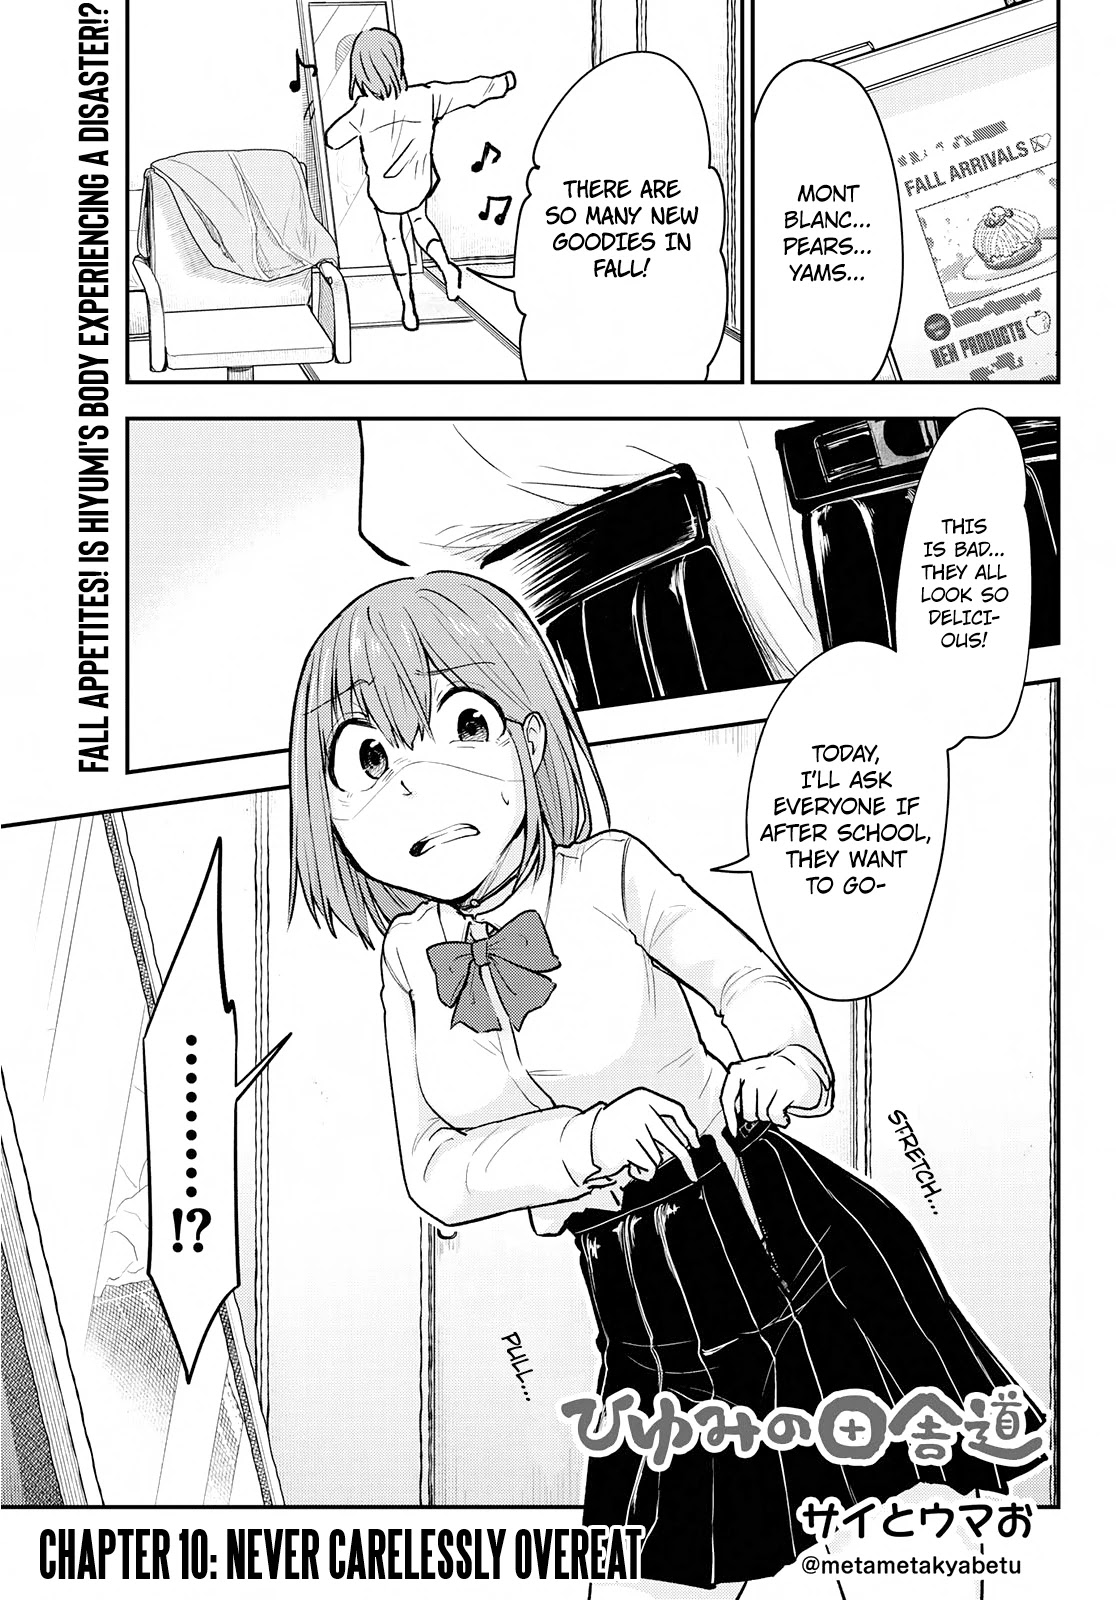 Hiyumi's Country Road Chapter 10 #1